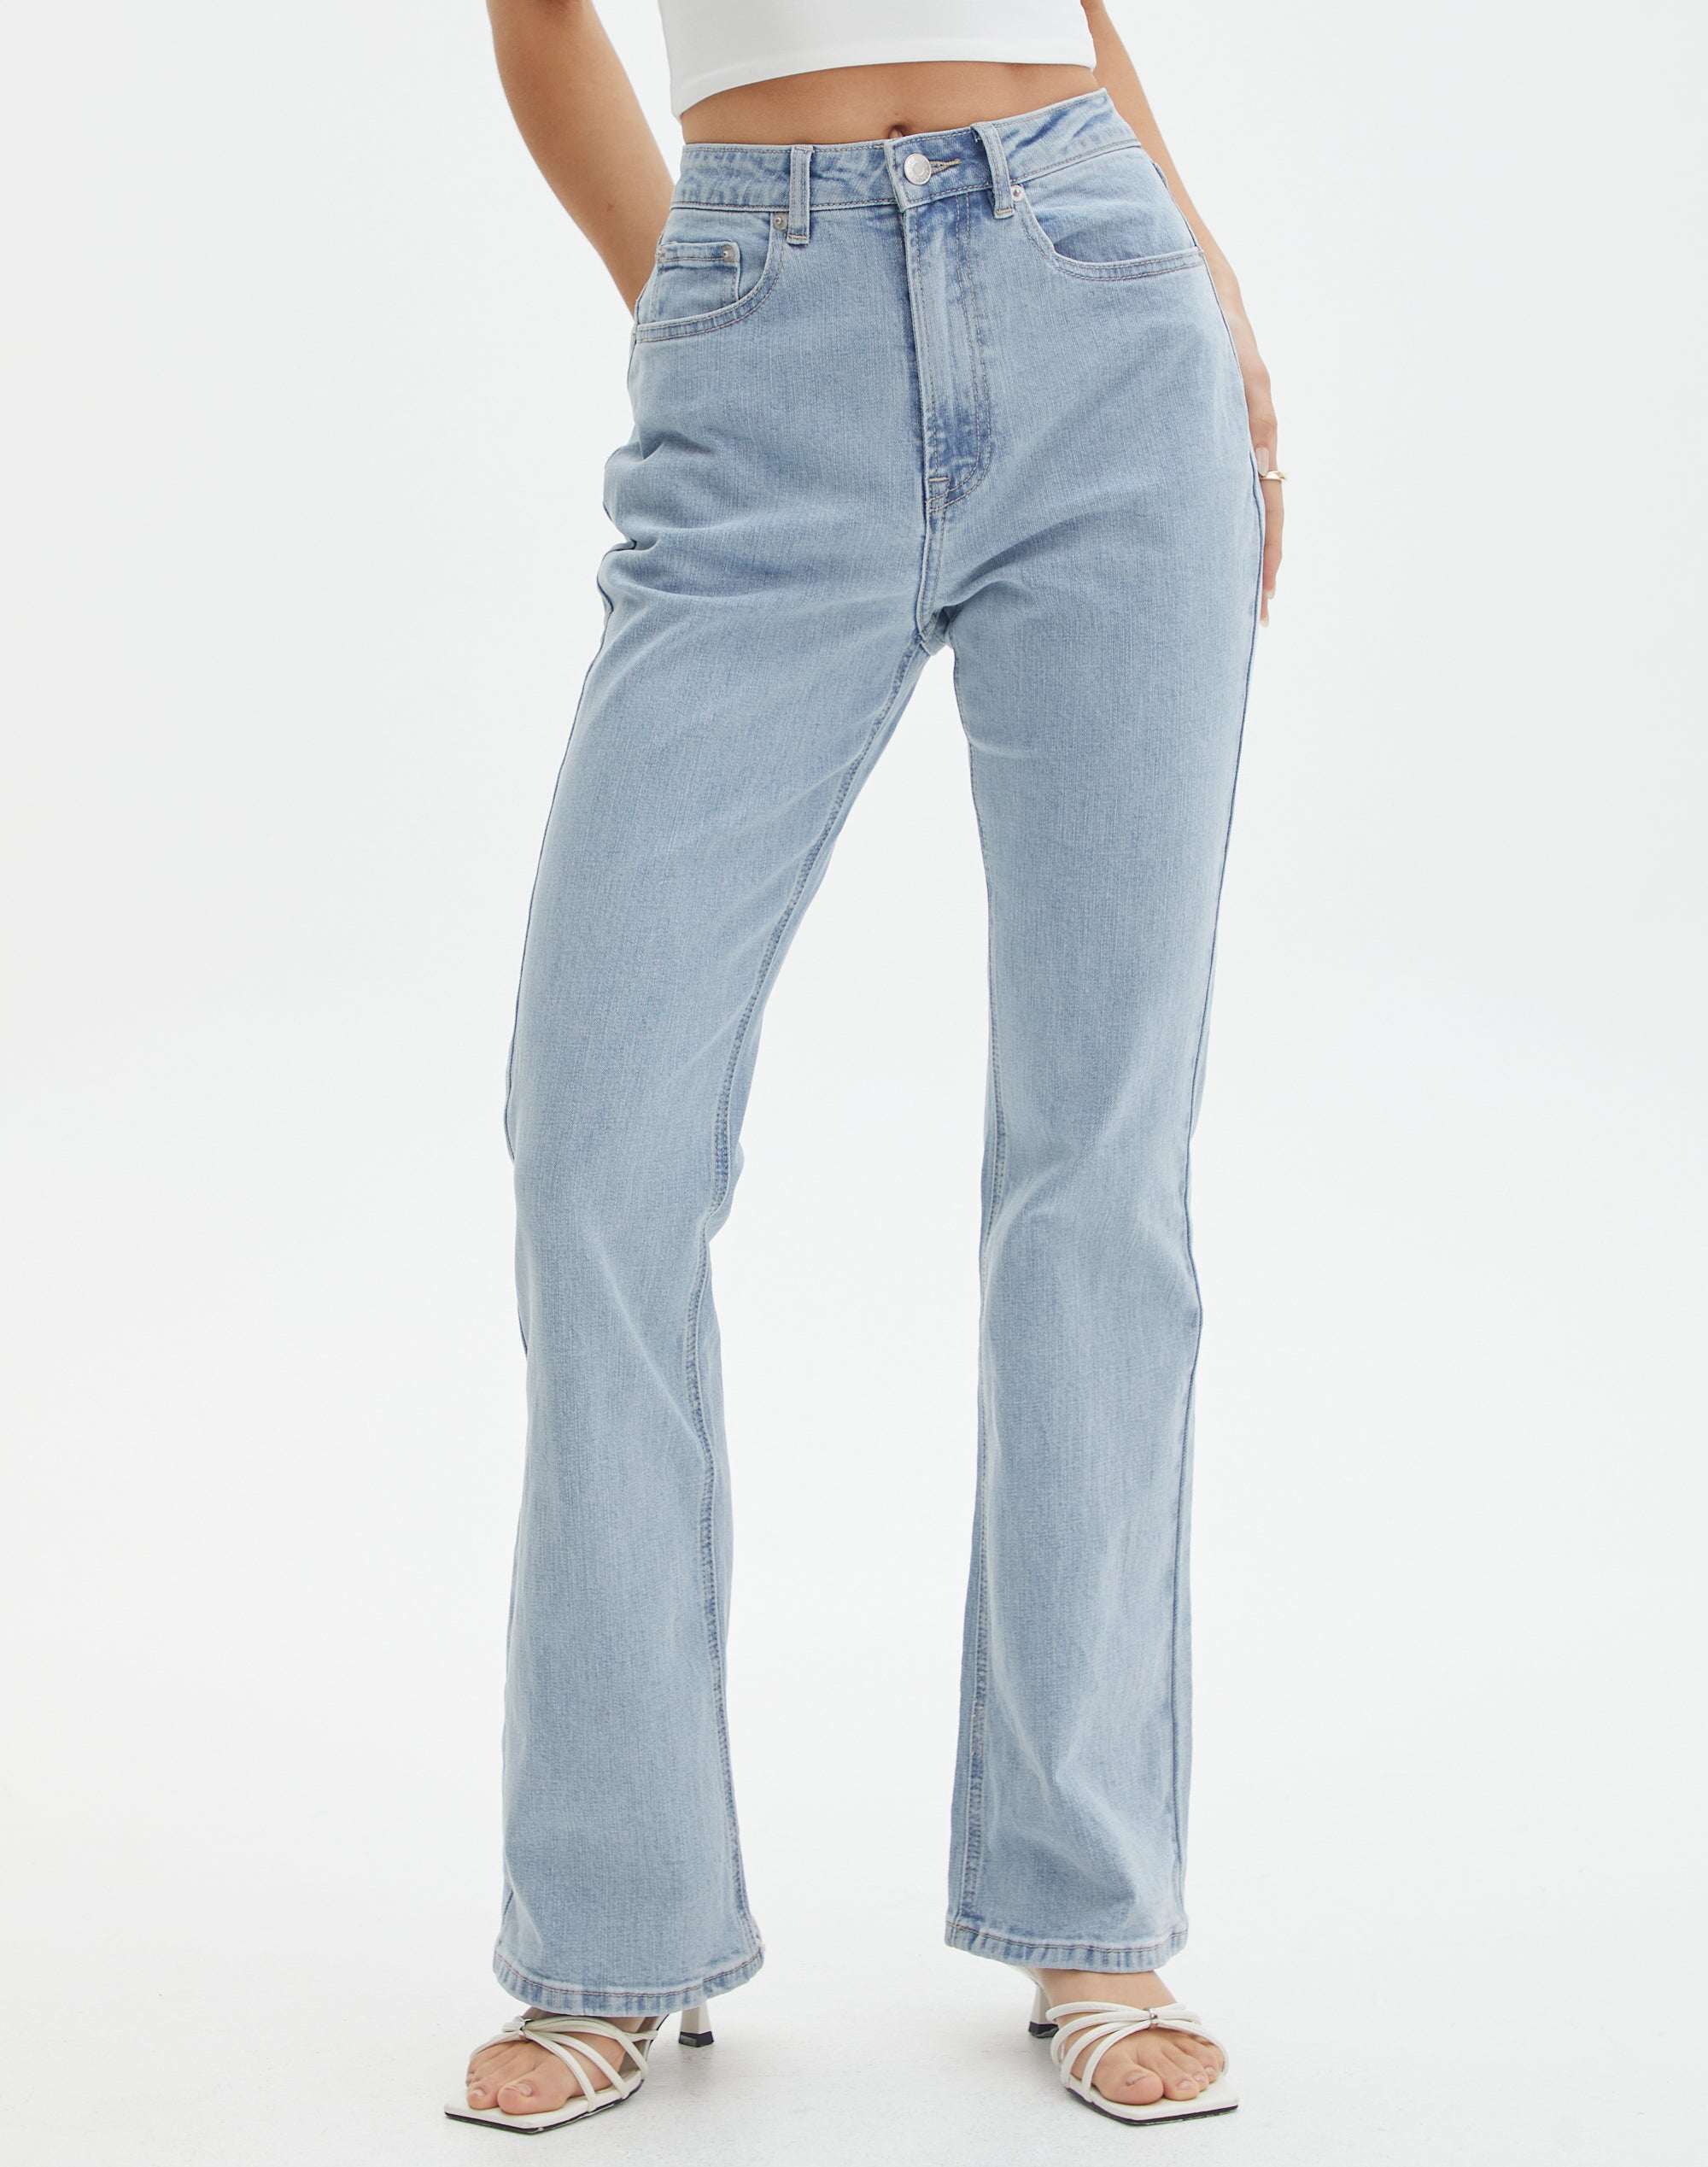 High Rise Boot Cut Jean in Justin Ice Wash